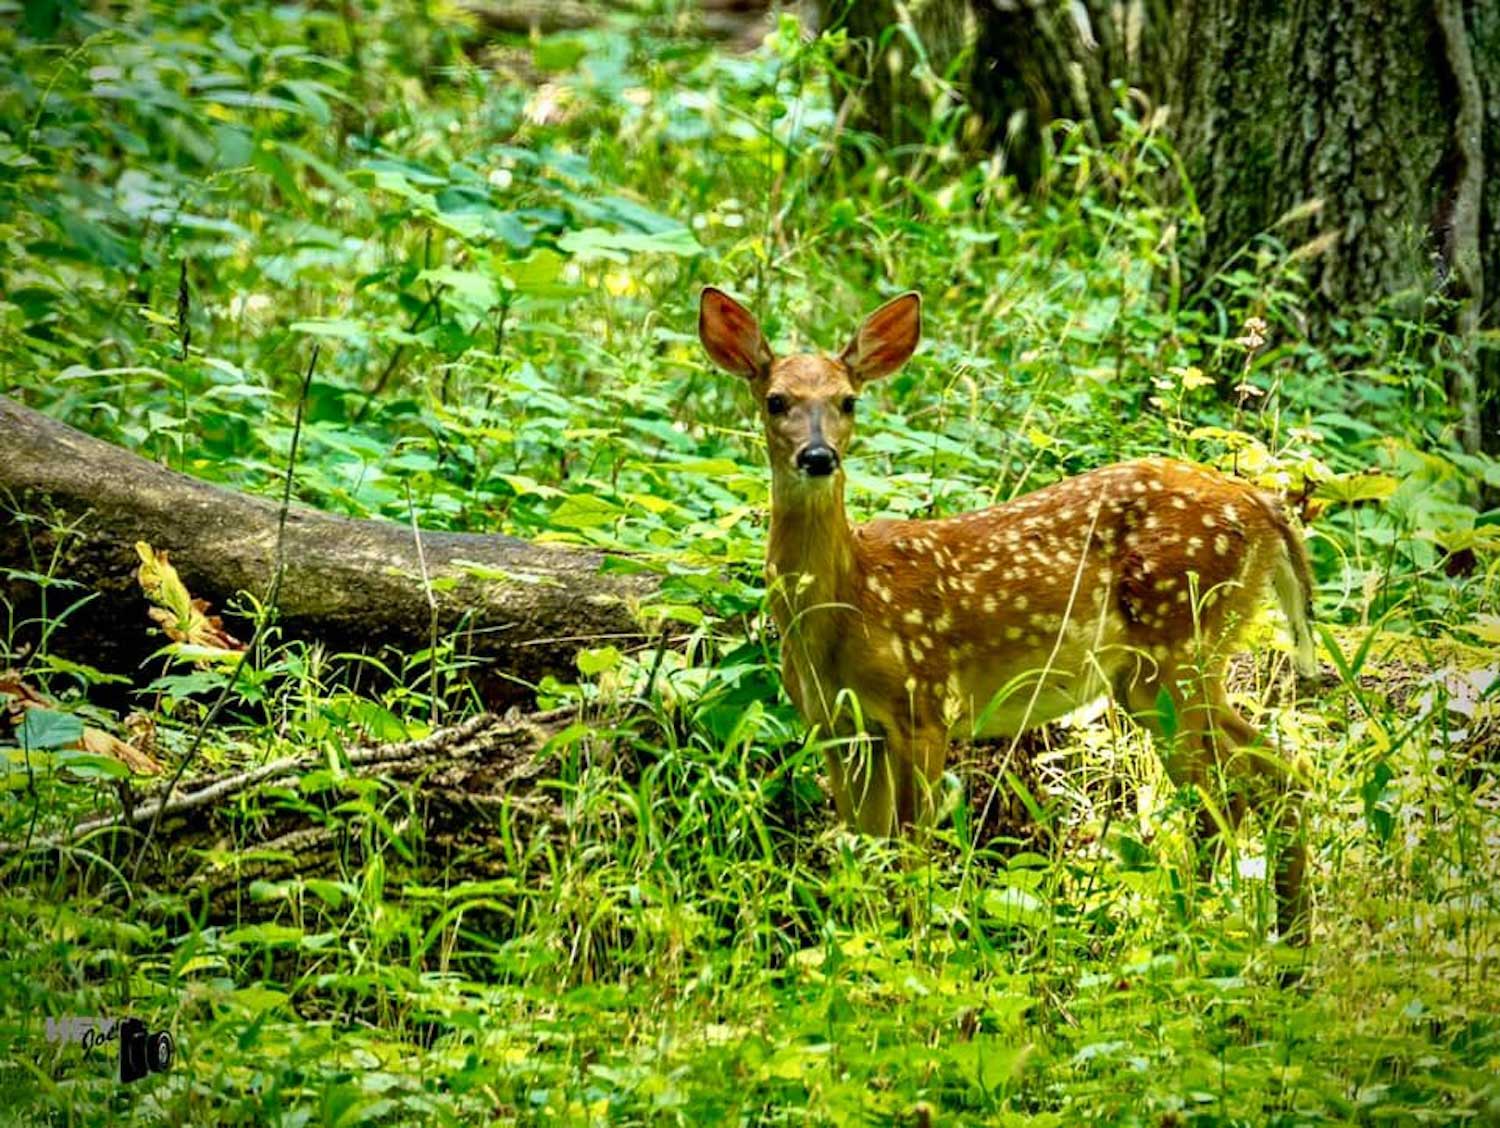 A white-tailed deer fawn standing in tall grasses next to a fawn.